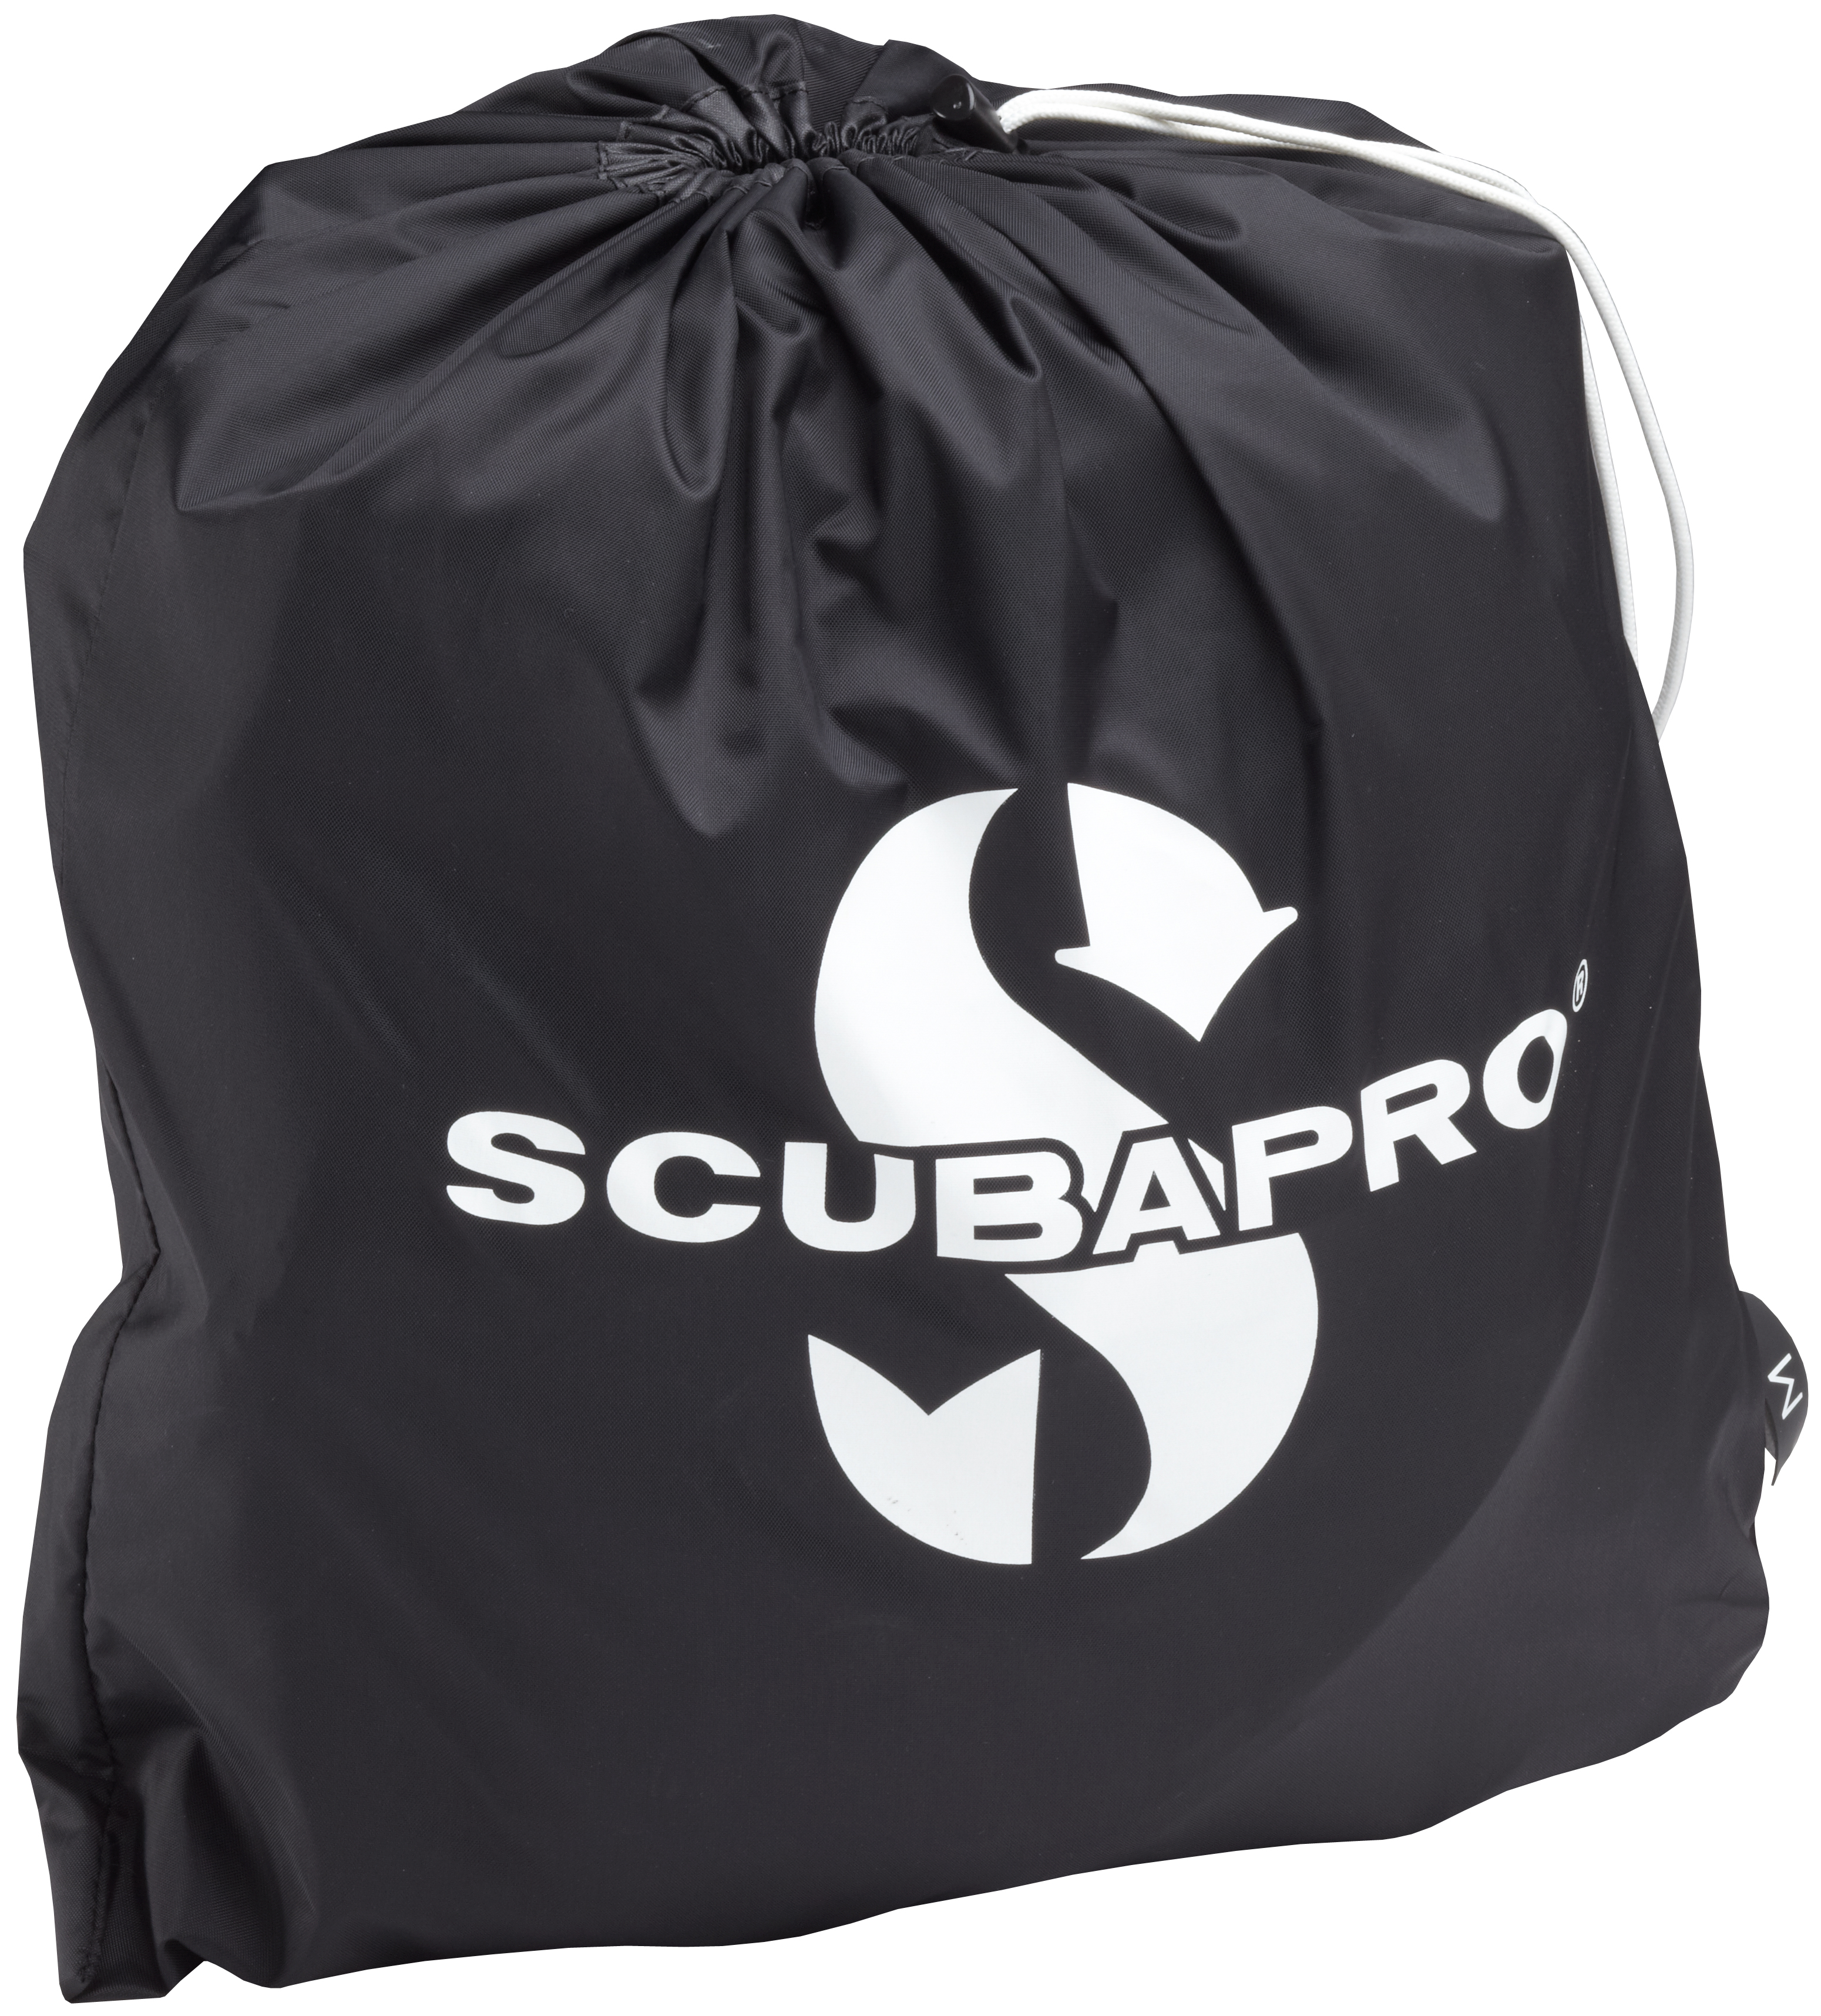 Scubapro Go Bcd With Air 2 Best Sale, 54% OFF | www.emanagreen.com